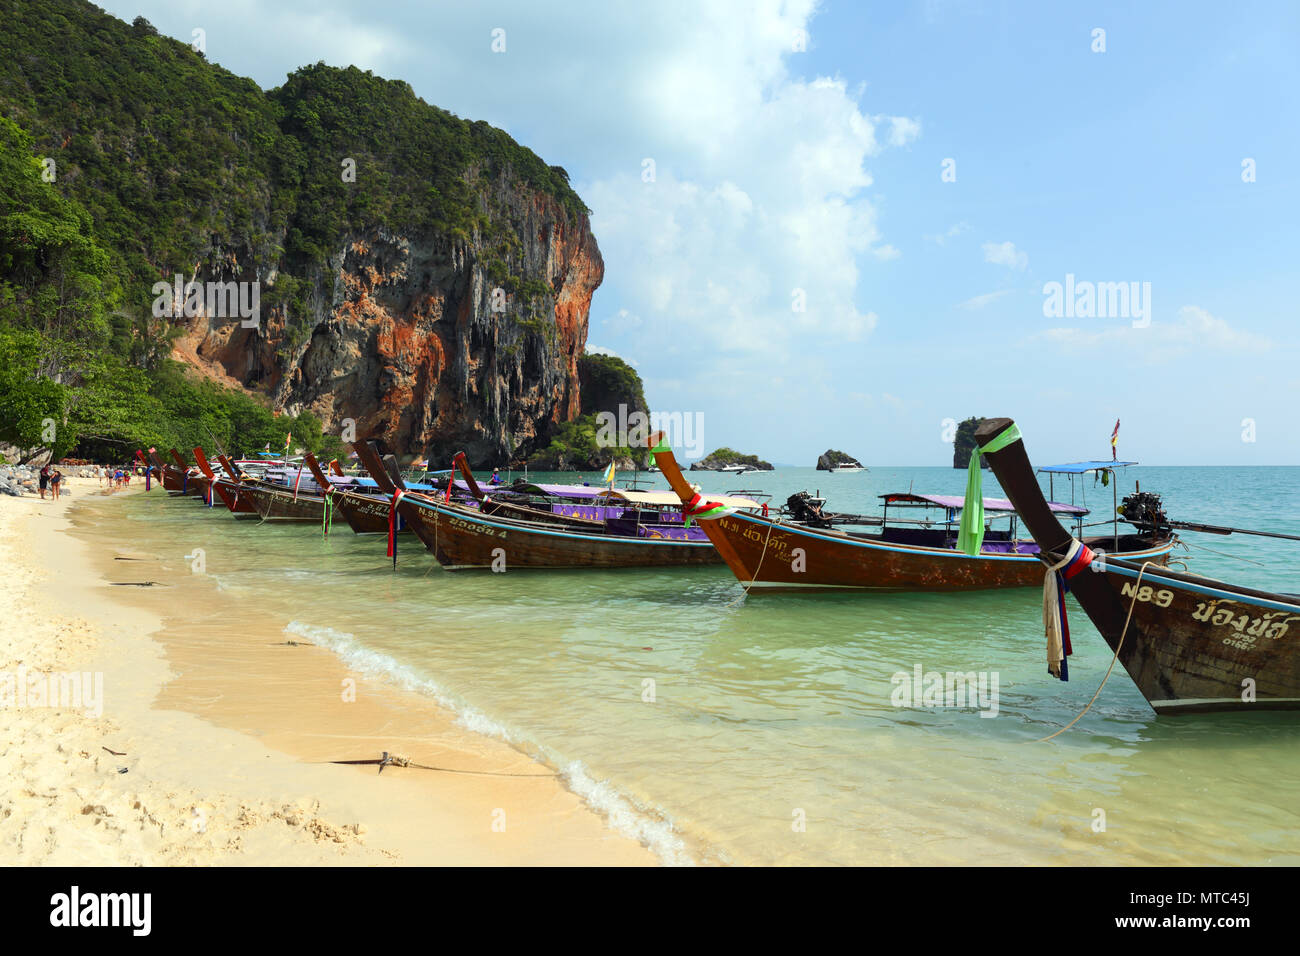 Long tail boats on tropical beach in Thailand Stock Photo